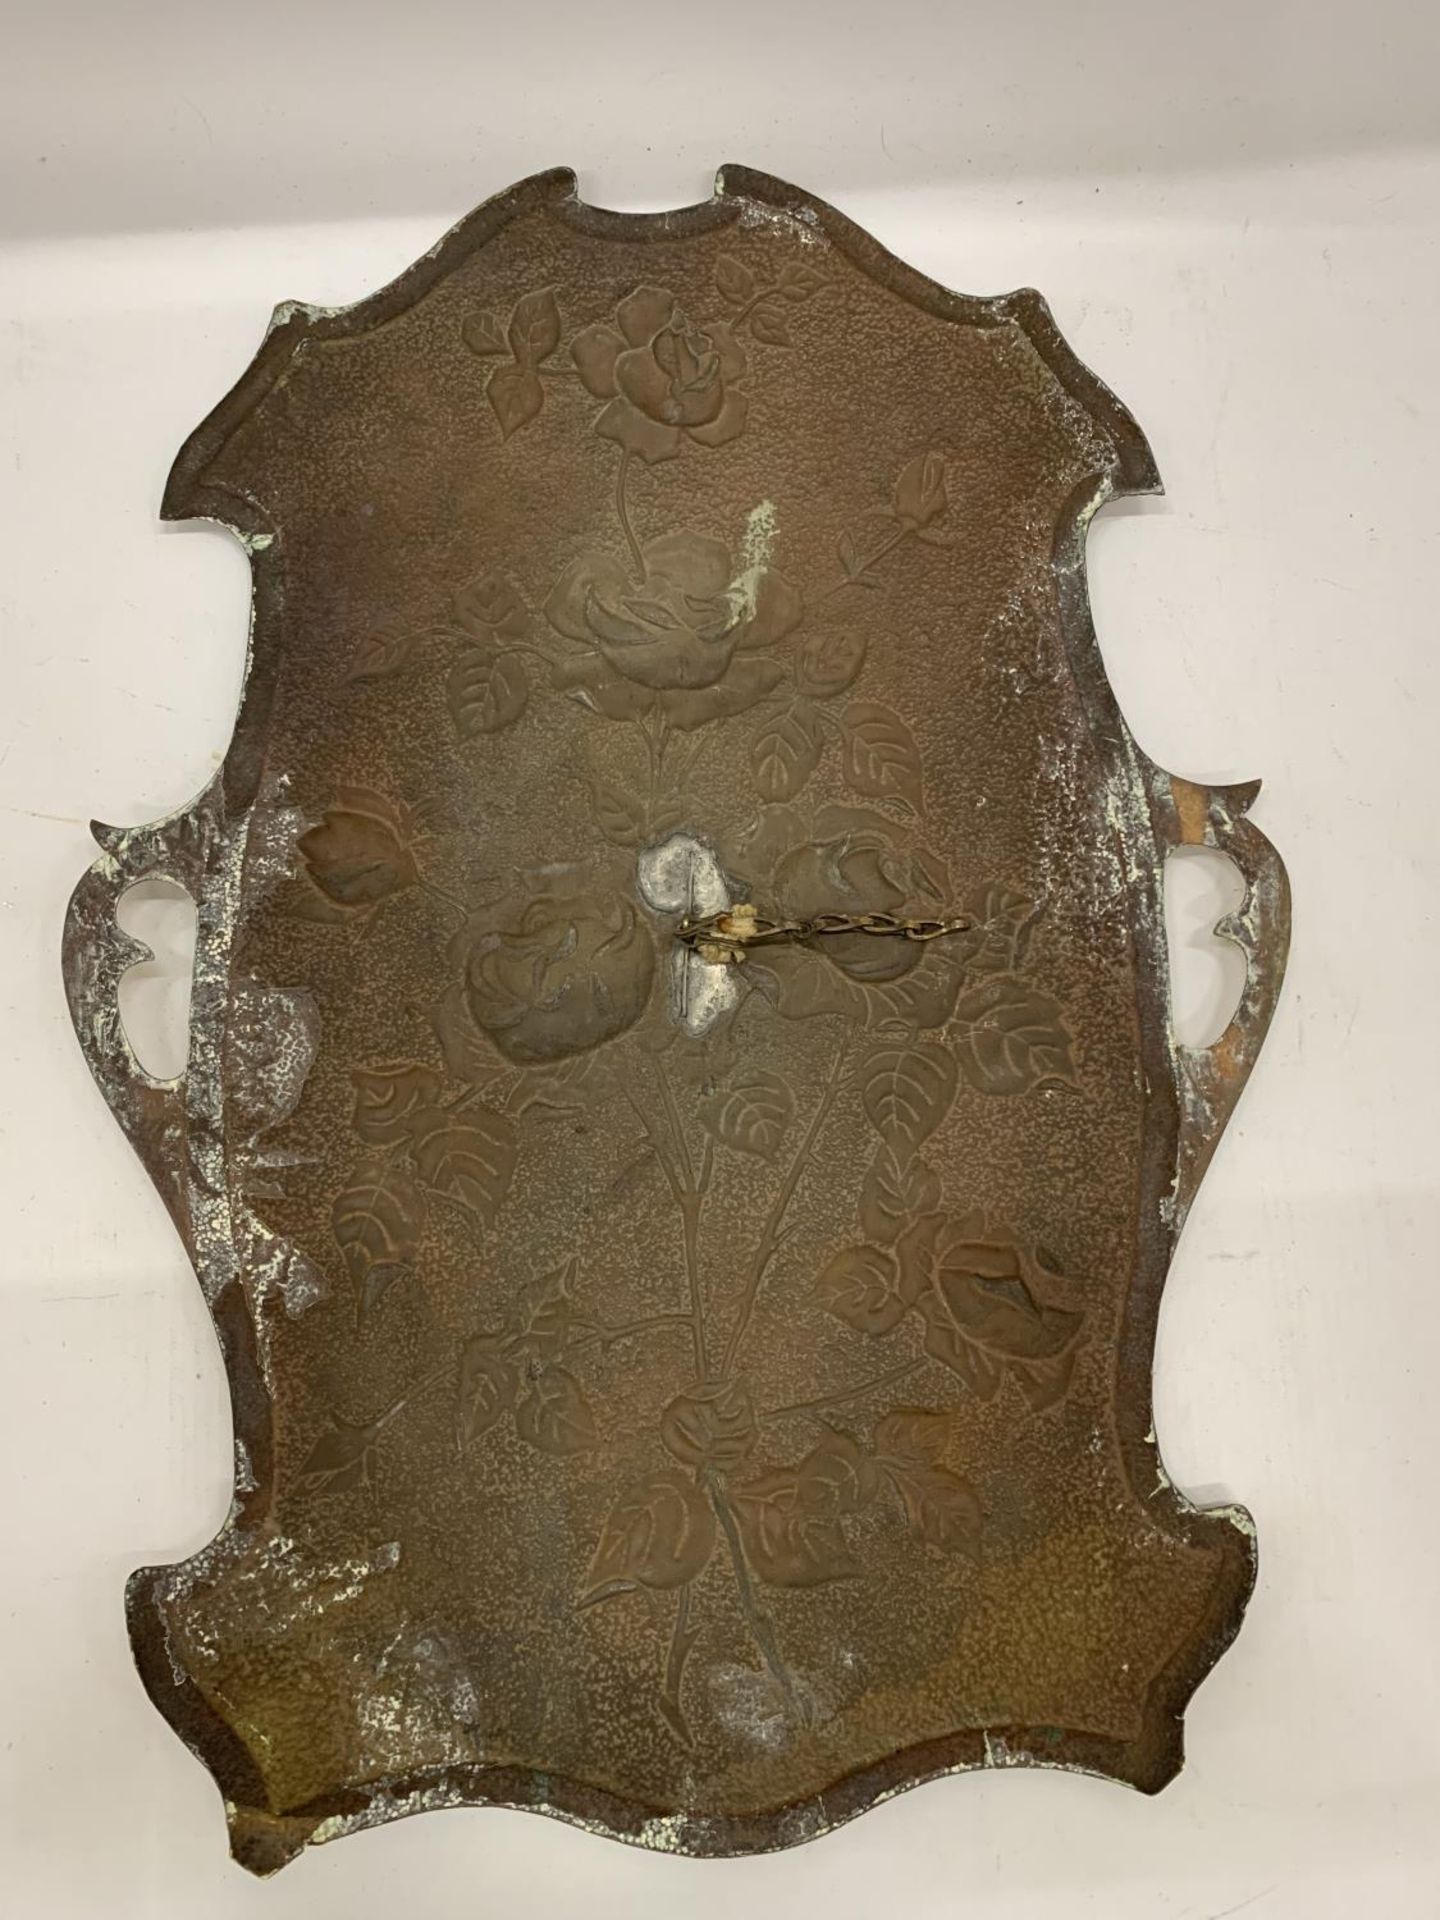 A BRASS WALL HANGING IN THE SHAPE OF A SHIELD WITH FLORAL EMBOSSING 46CM X 34CM - Image 3 of 3